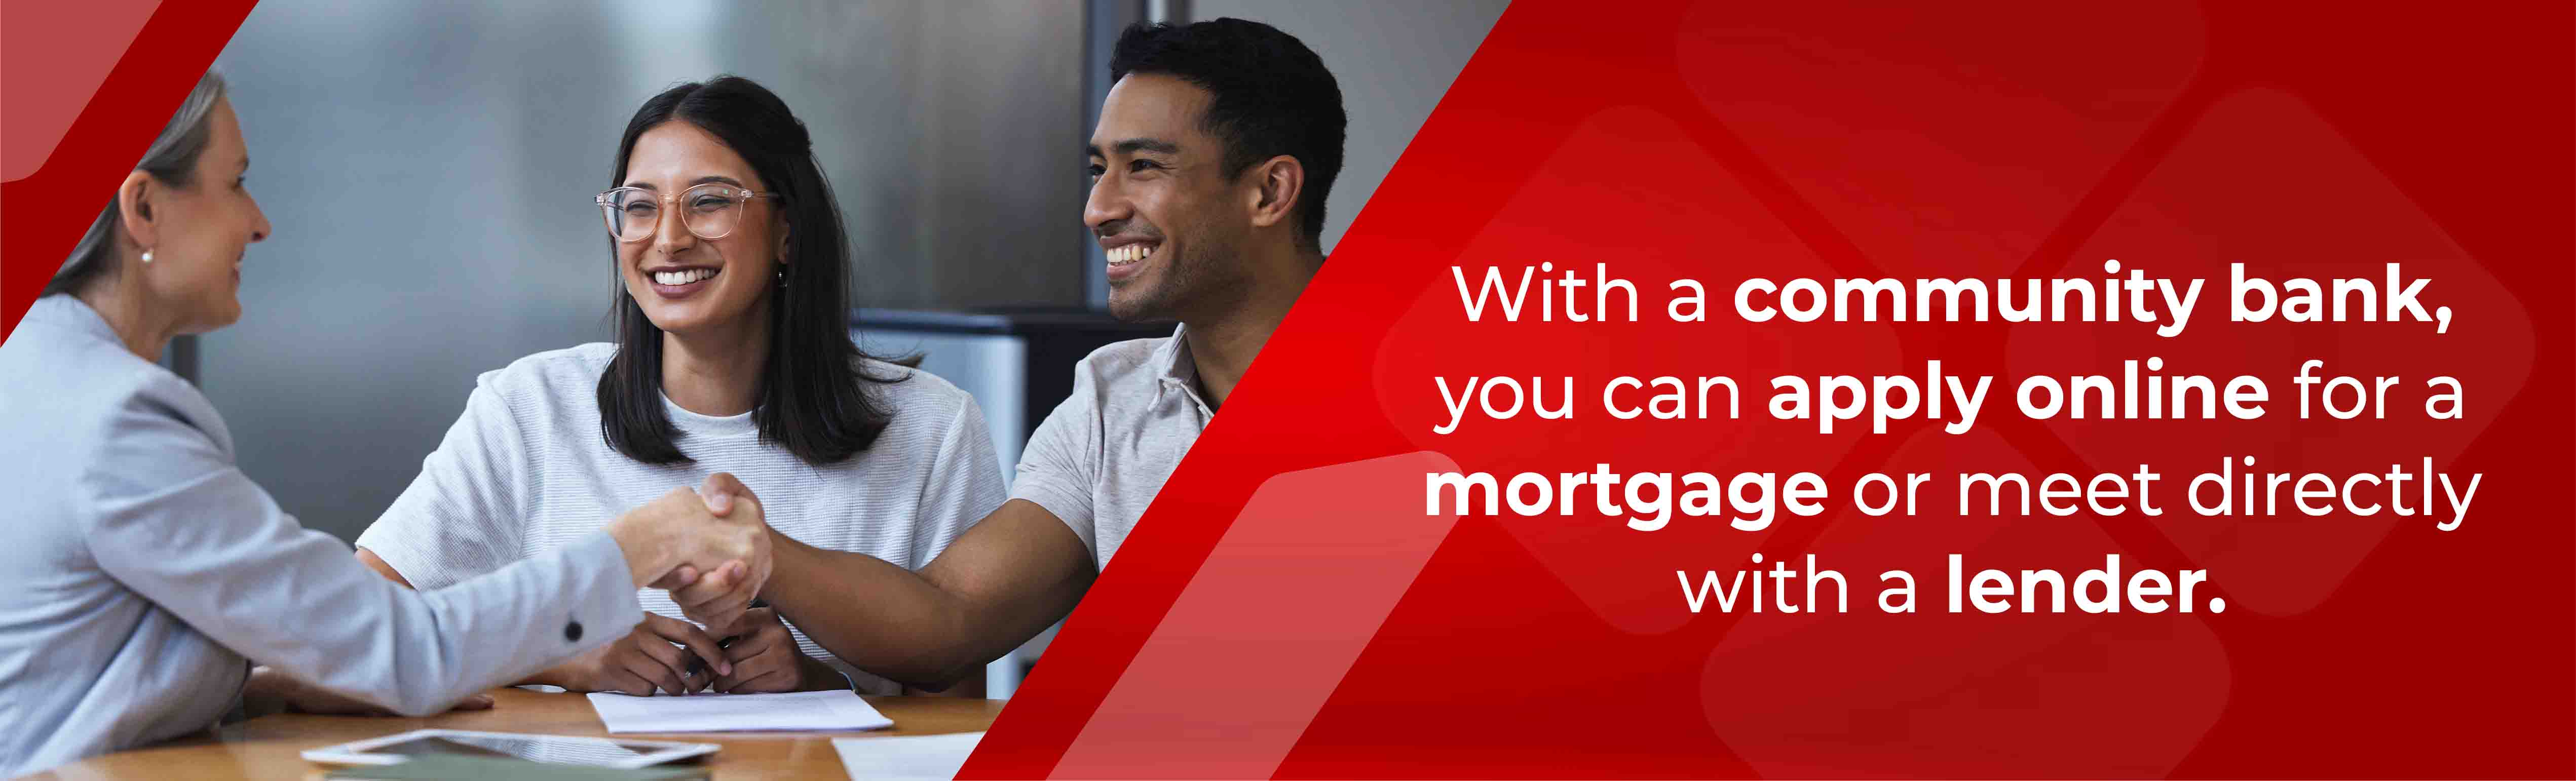 With a community bank, you can apply for a mortgage or meet directly with a lender - Image of couple meeting with a lender